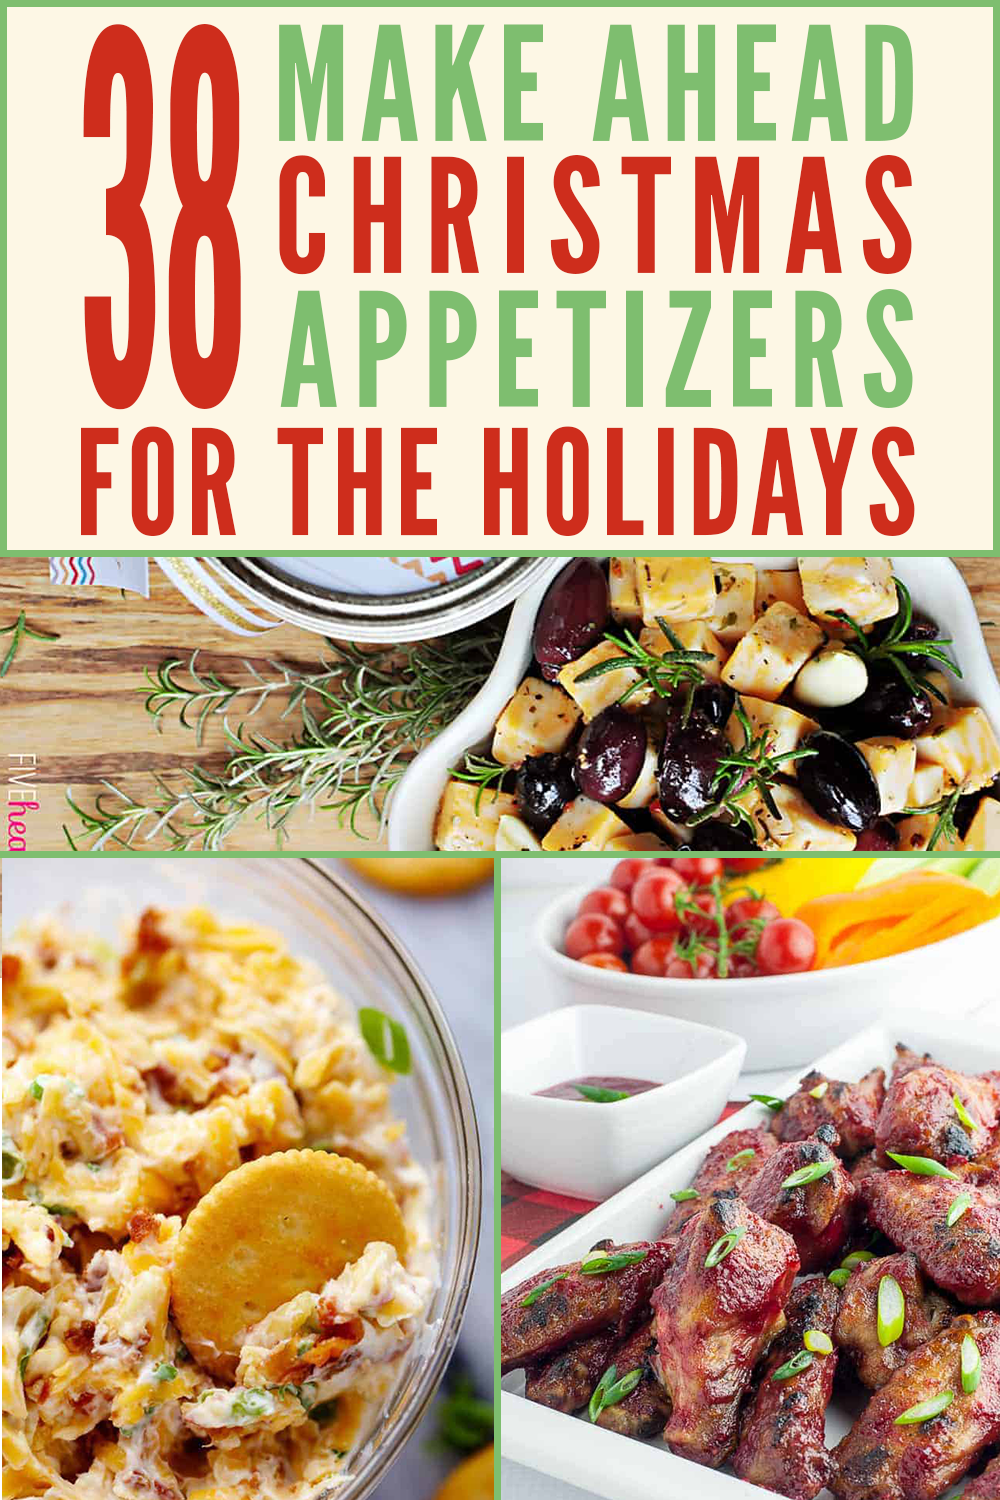 37 Delicious and Easy Make-Ahead Christmas Appetizers | Edit + Nest -   19 easy holiday Recipes ideas